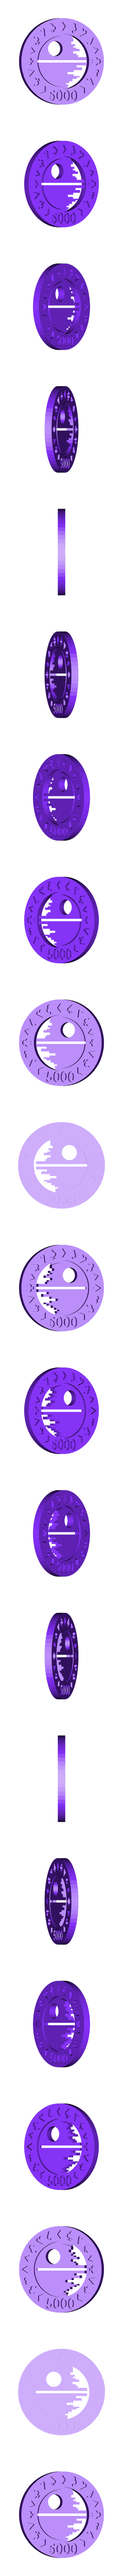 5000.stl Download STL file Star Wars - Poker Chips • Object to 3D print, InSpace